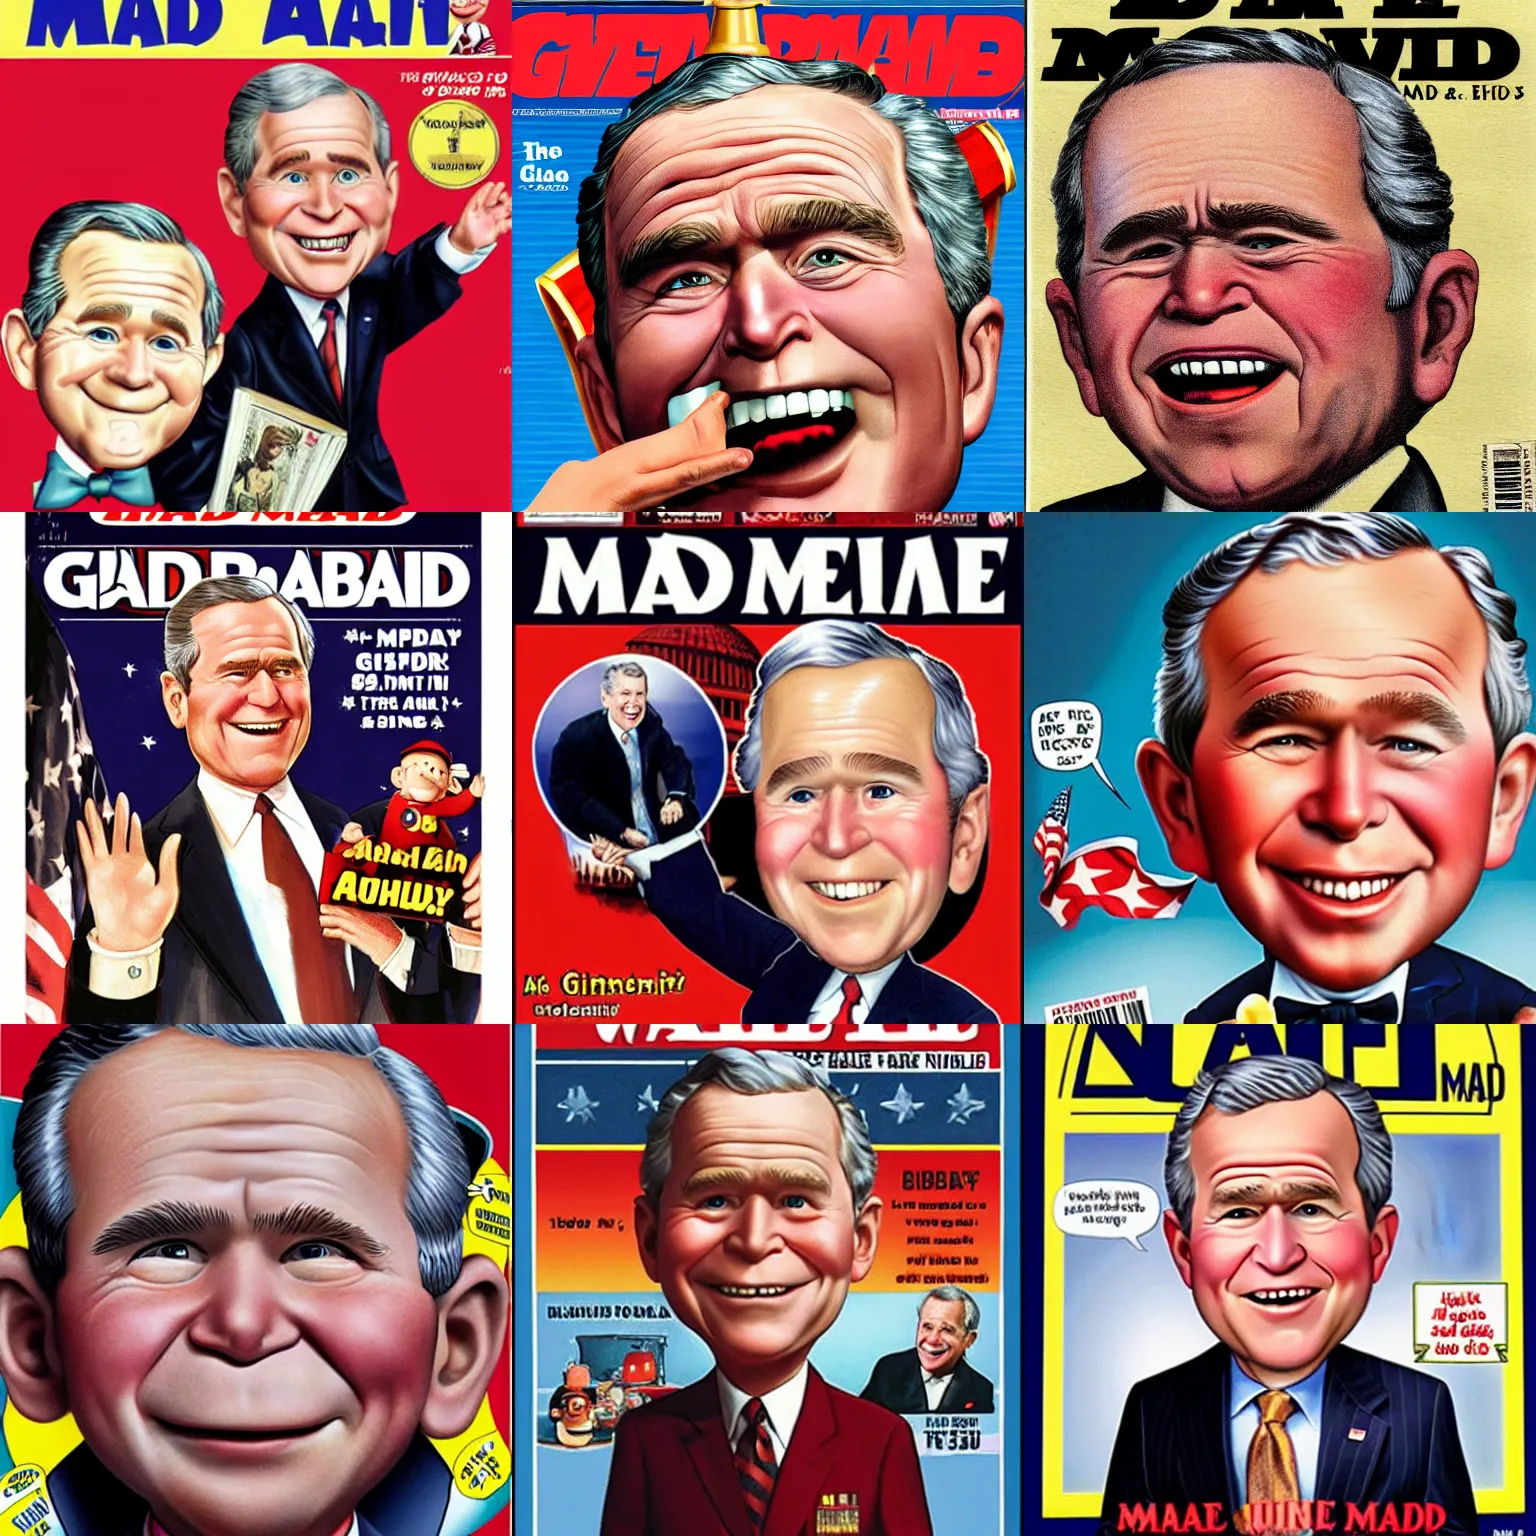 Prompt: GW Bush as Alfred E Neuman on the cover of the MAD magazine